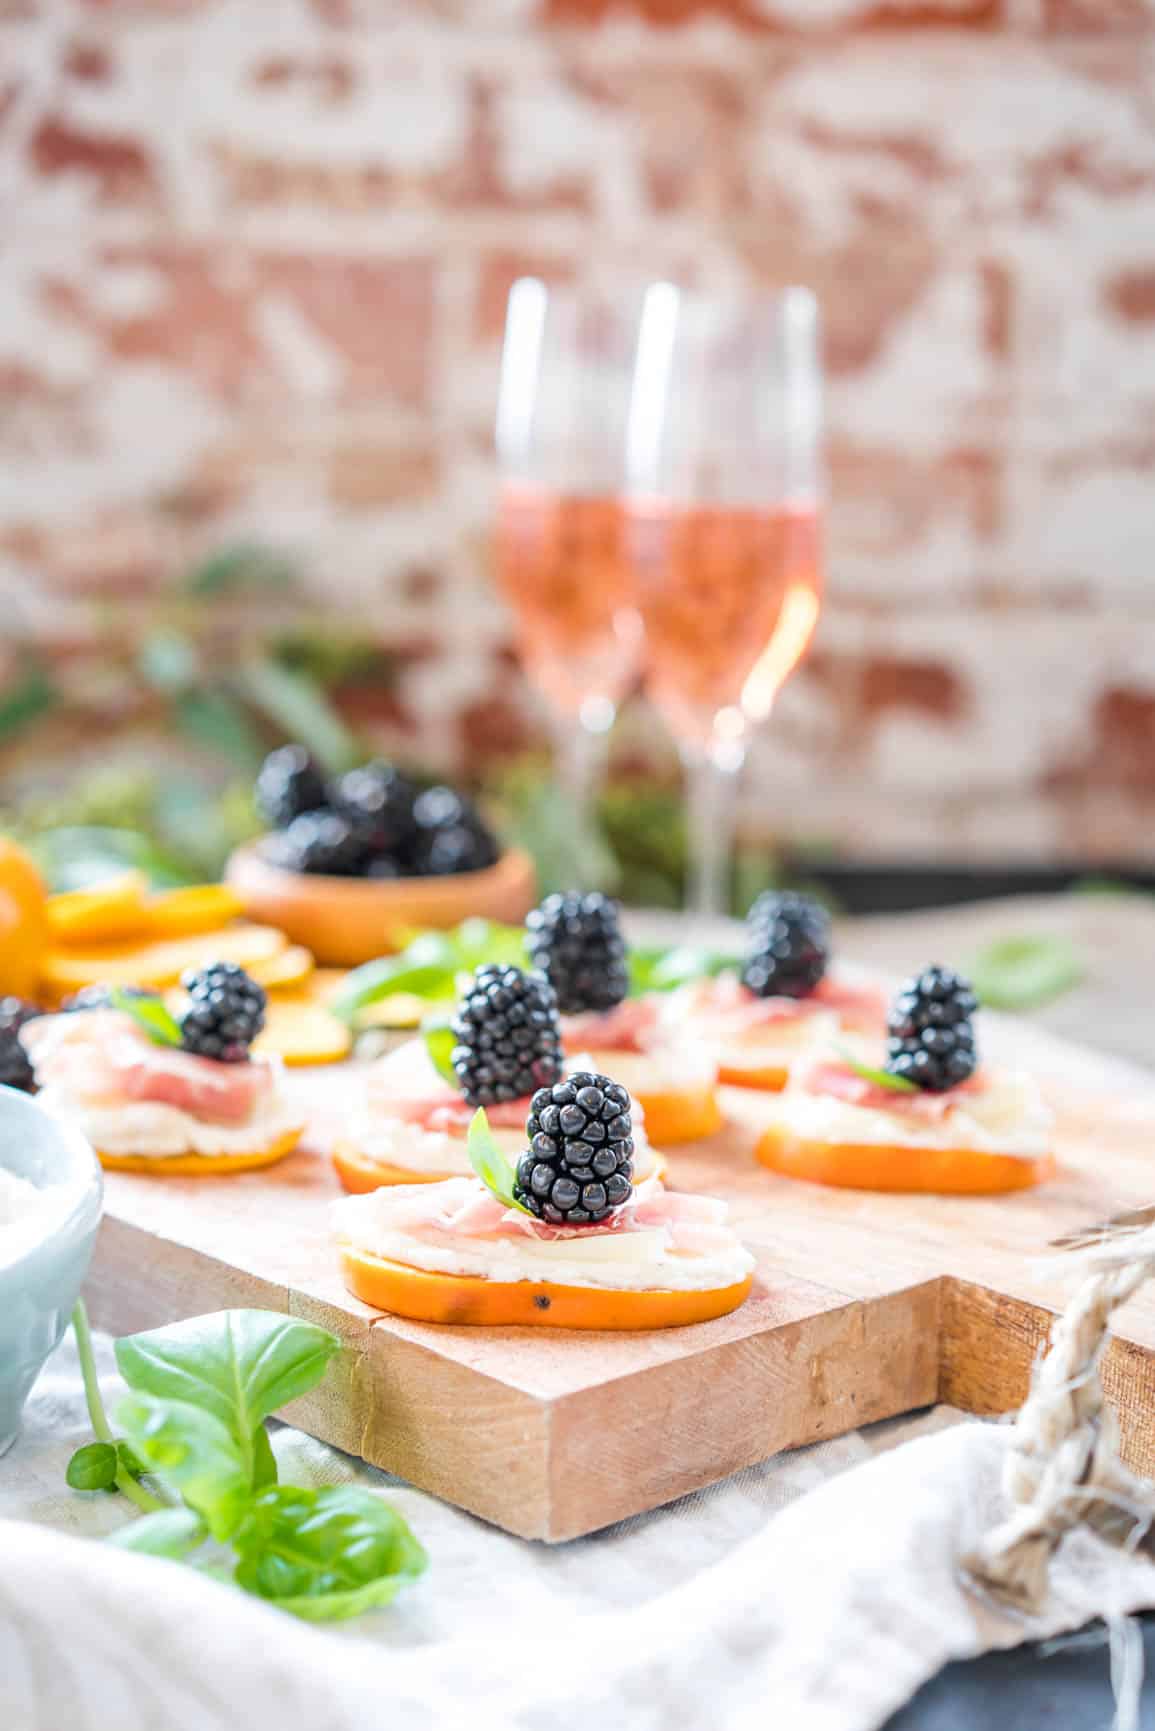 Easy Fuyu Persimmon Prosciutto Appetizers with Ricotta and Blackberries